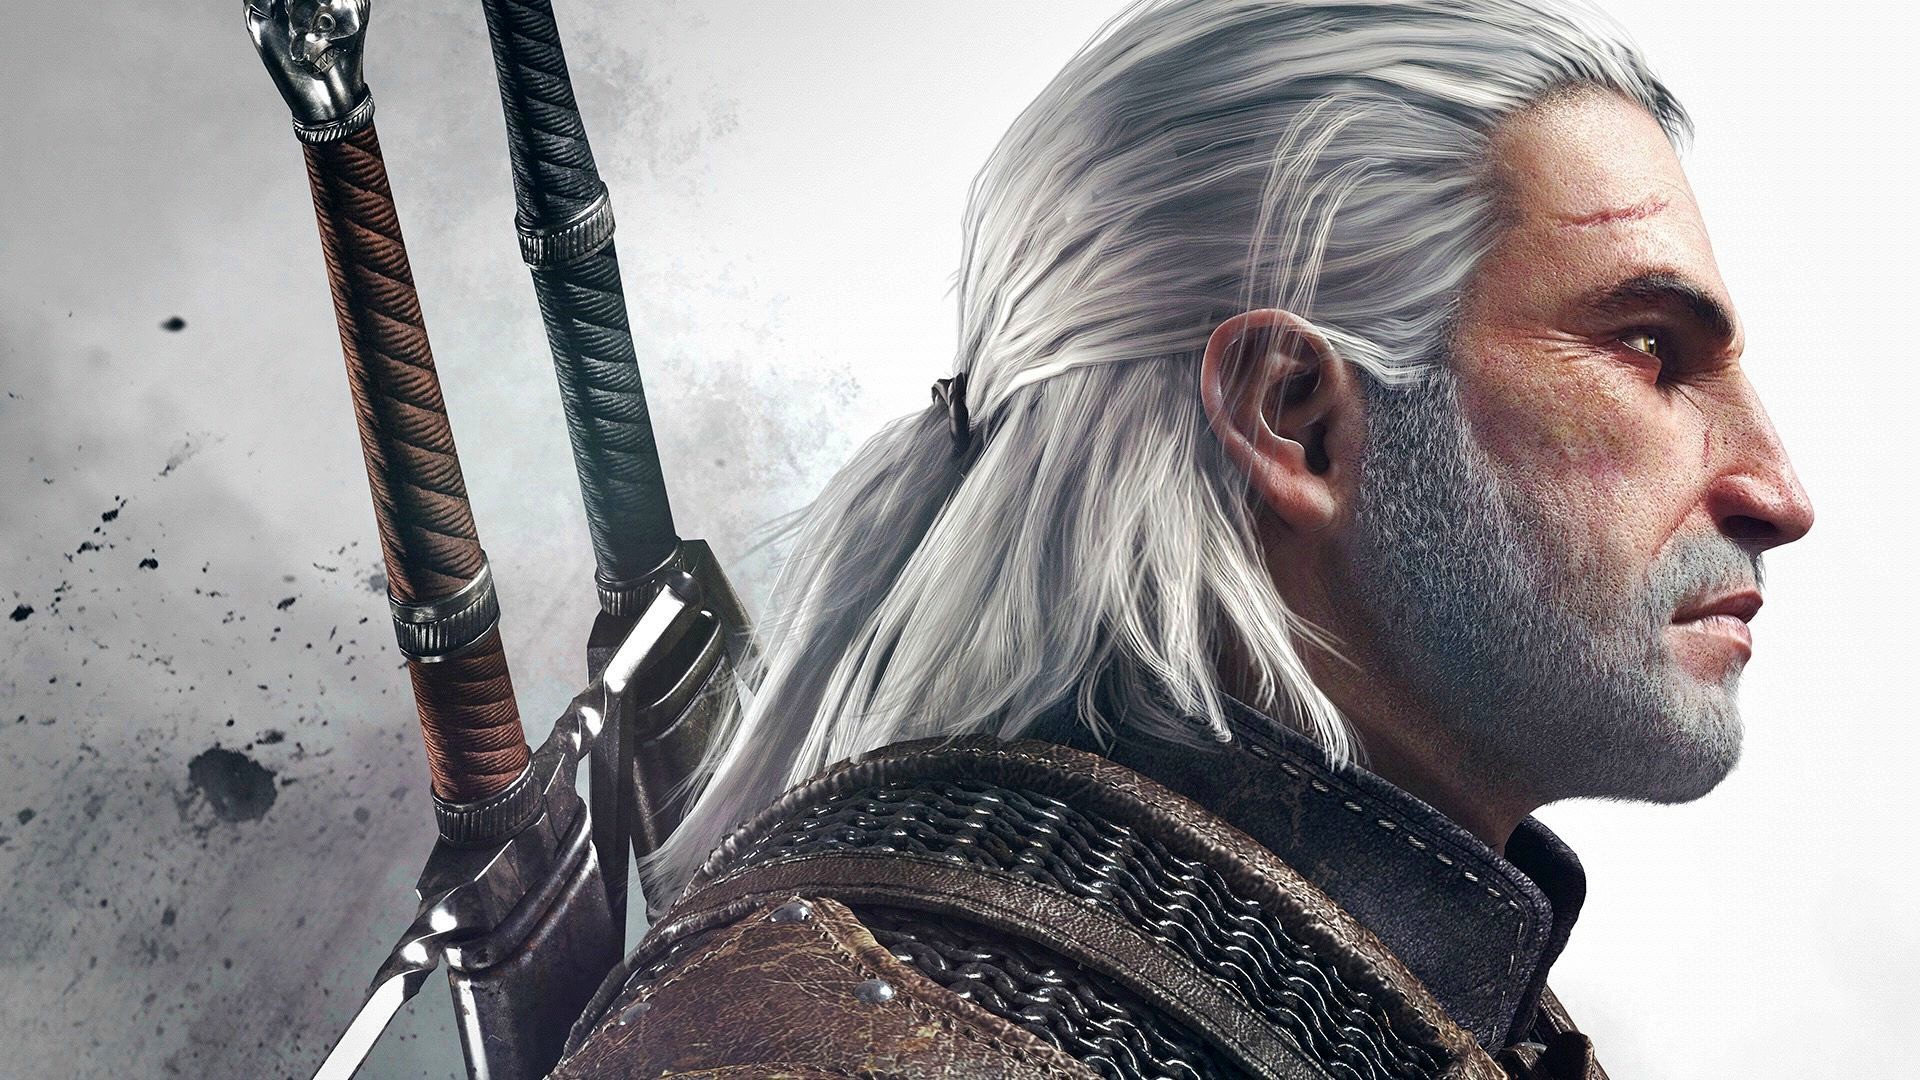 1920x1080 Video Game - The Witcher 3: Wild Hunt Geralt of Rivia Wallpaper